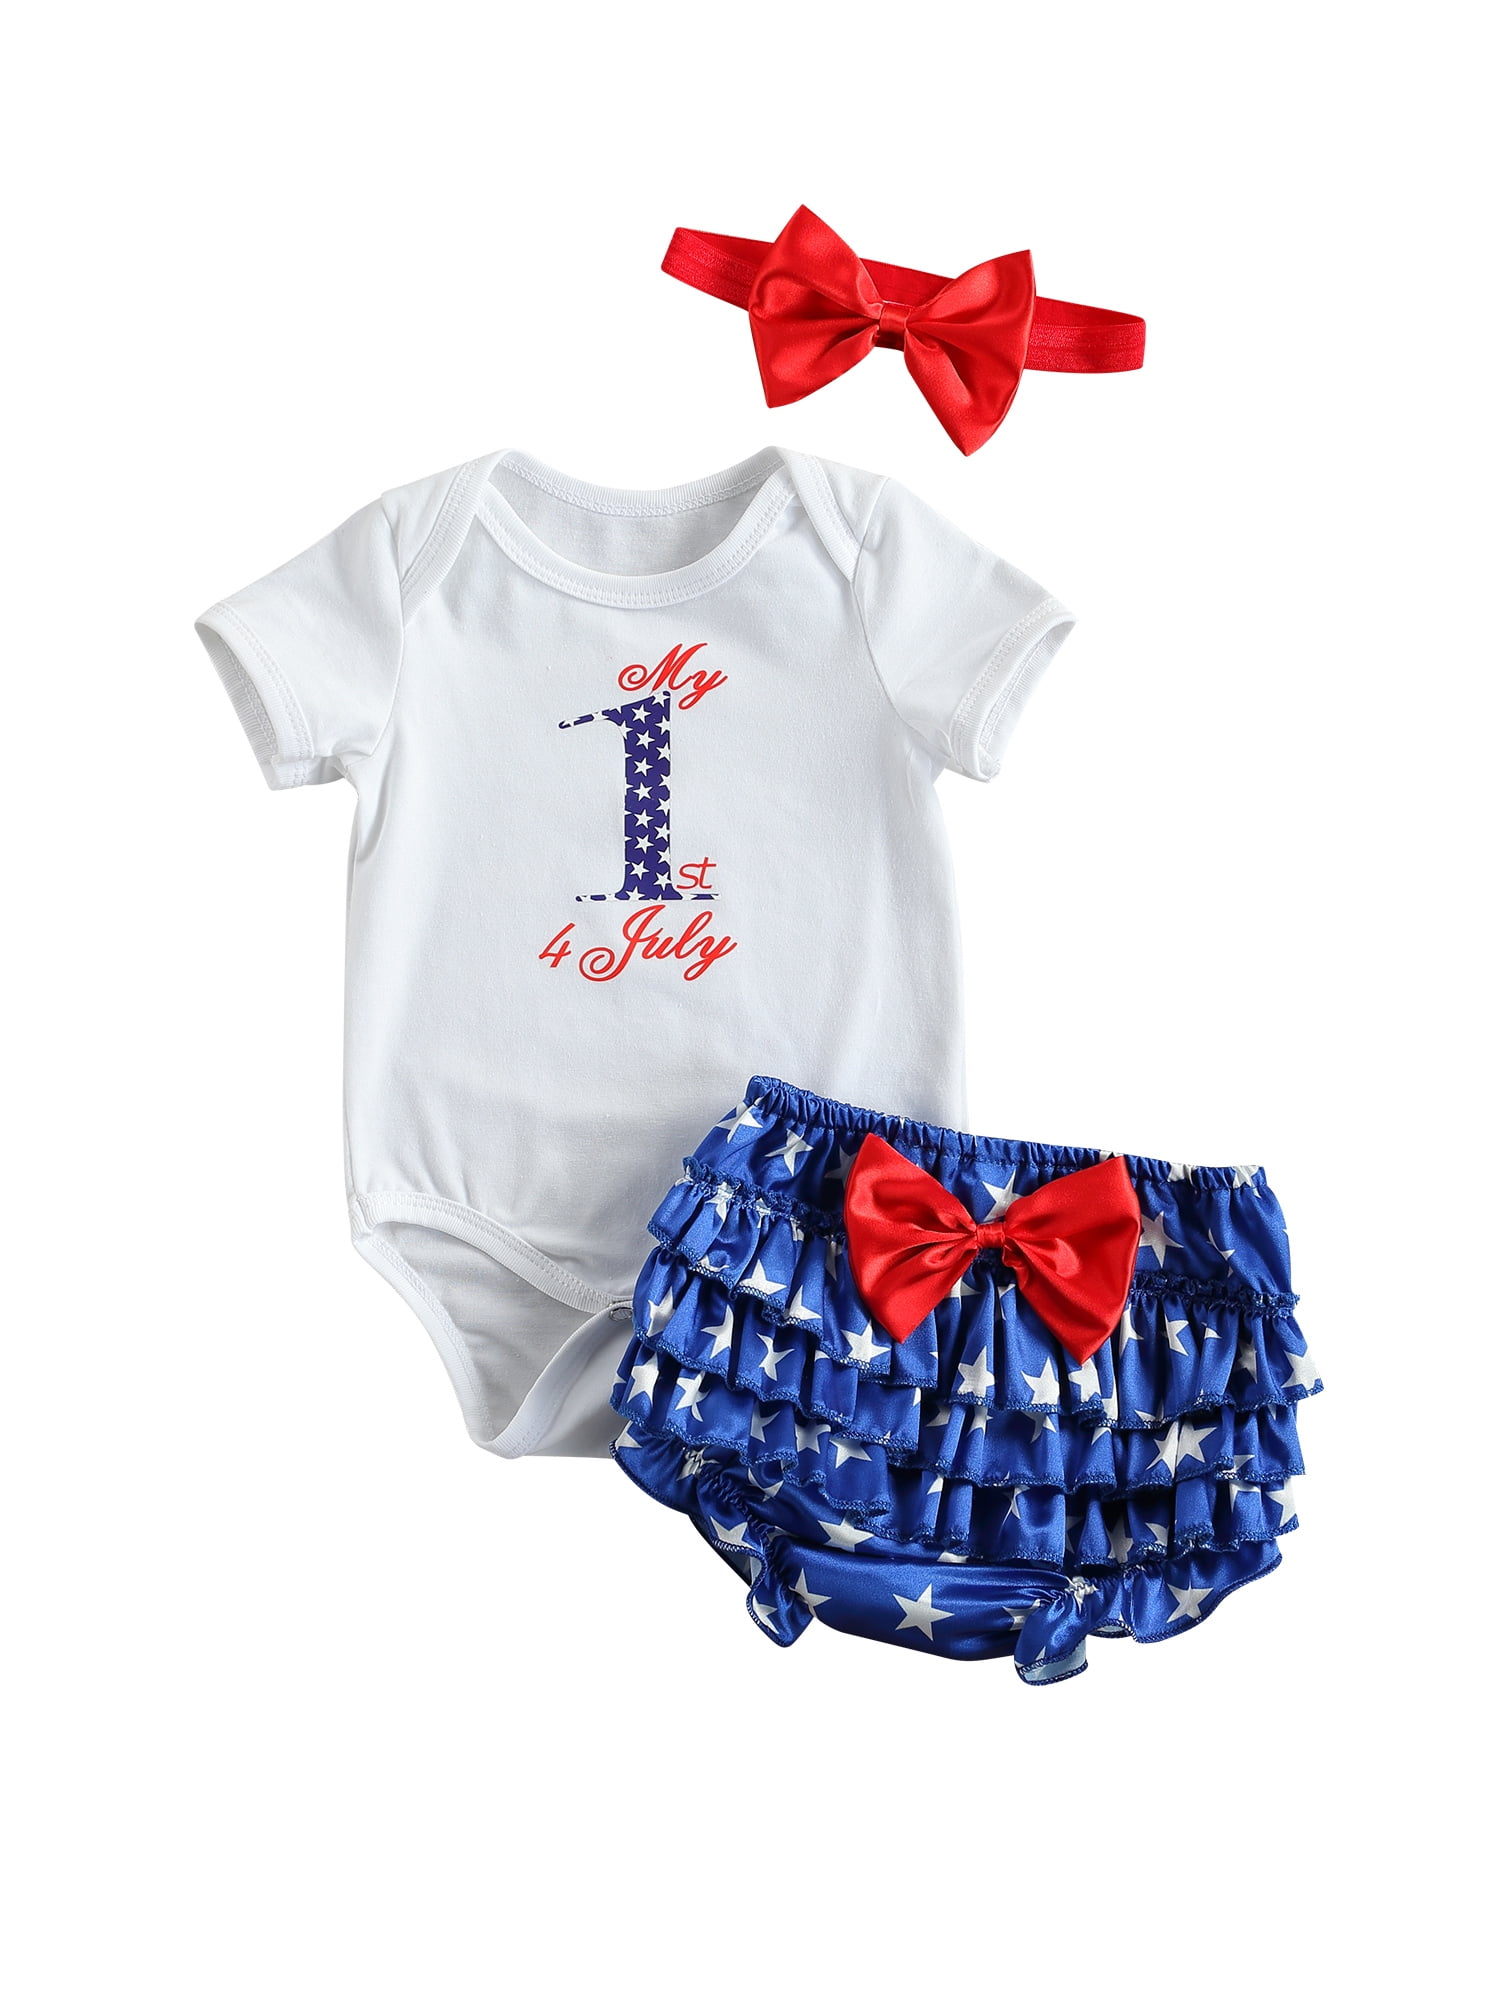 Newborn Baby Toddler Girl 4th of July Romper Bodysuit Headband Clothes Outfit 